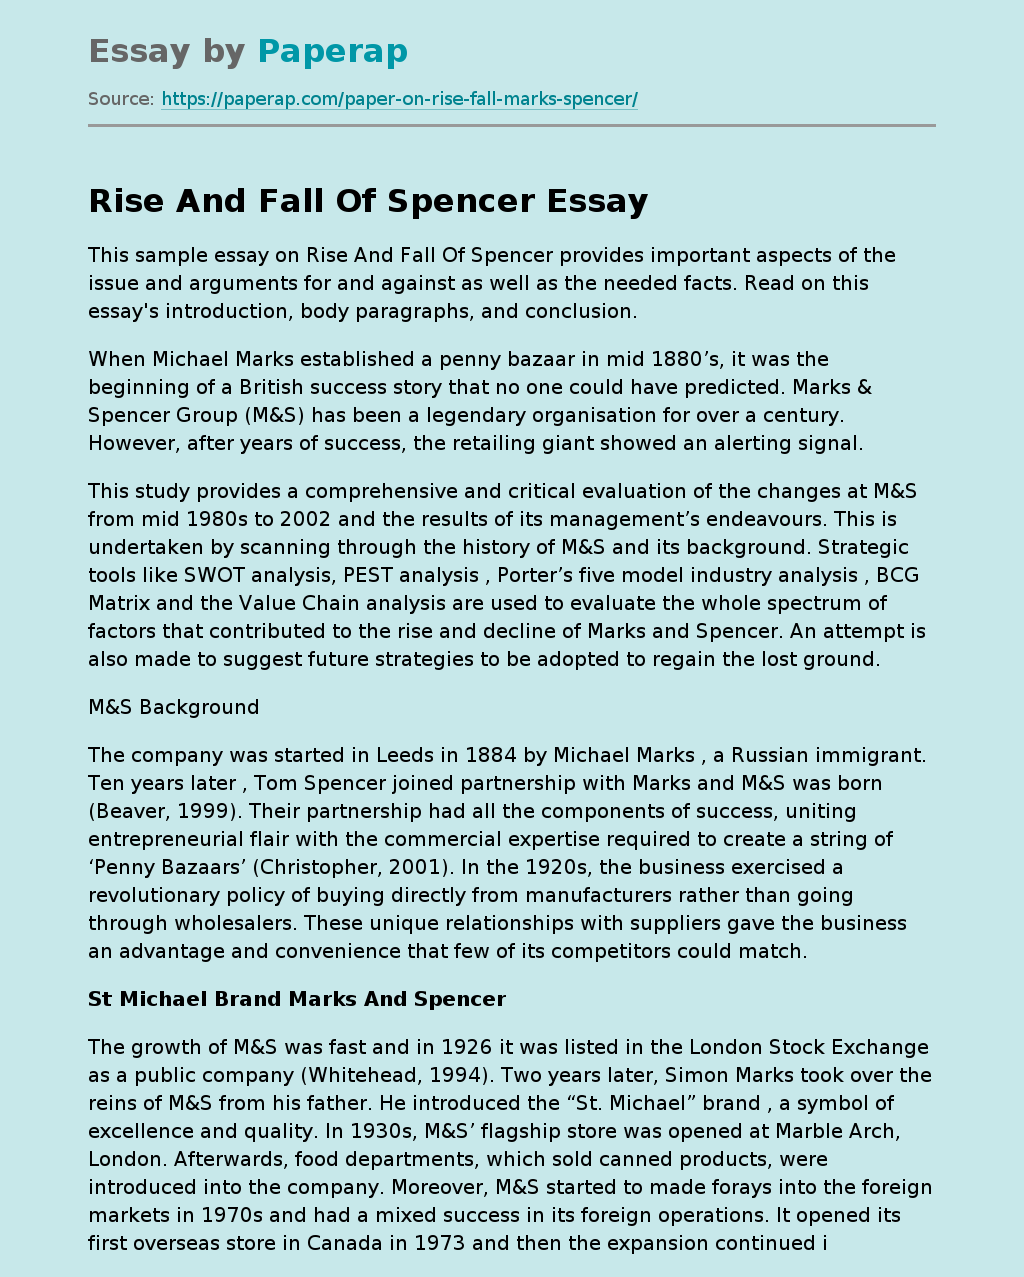 Rise And Fall Of Spencer